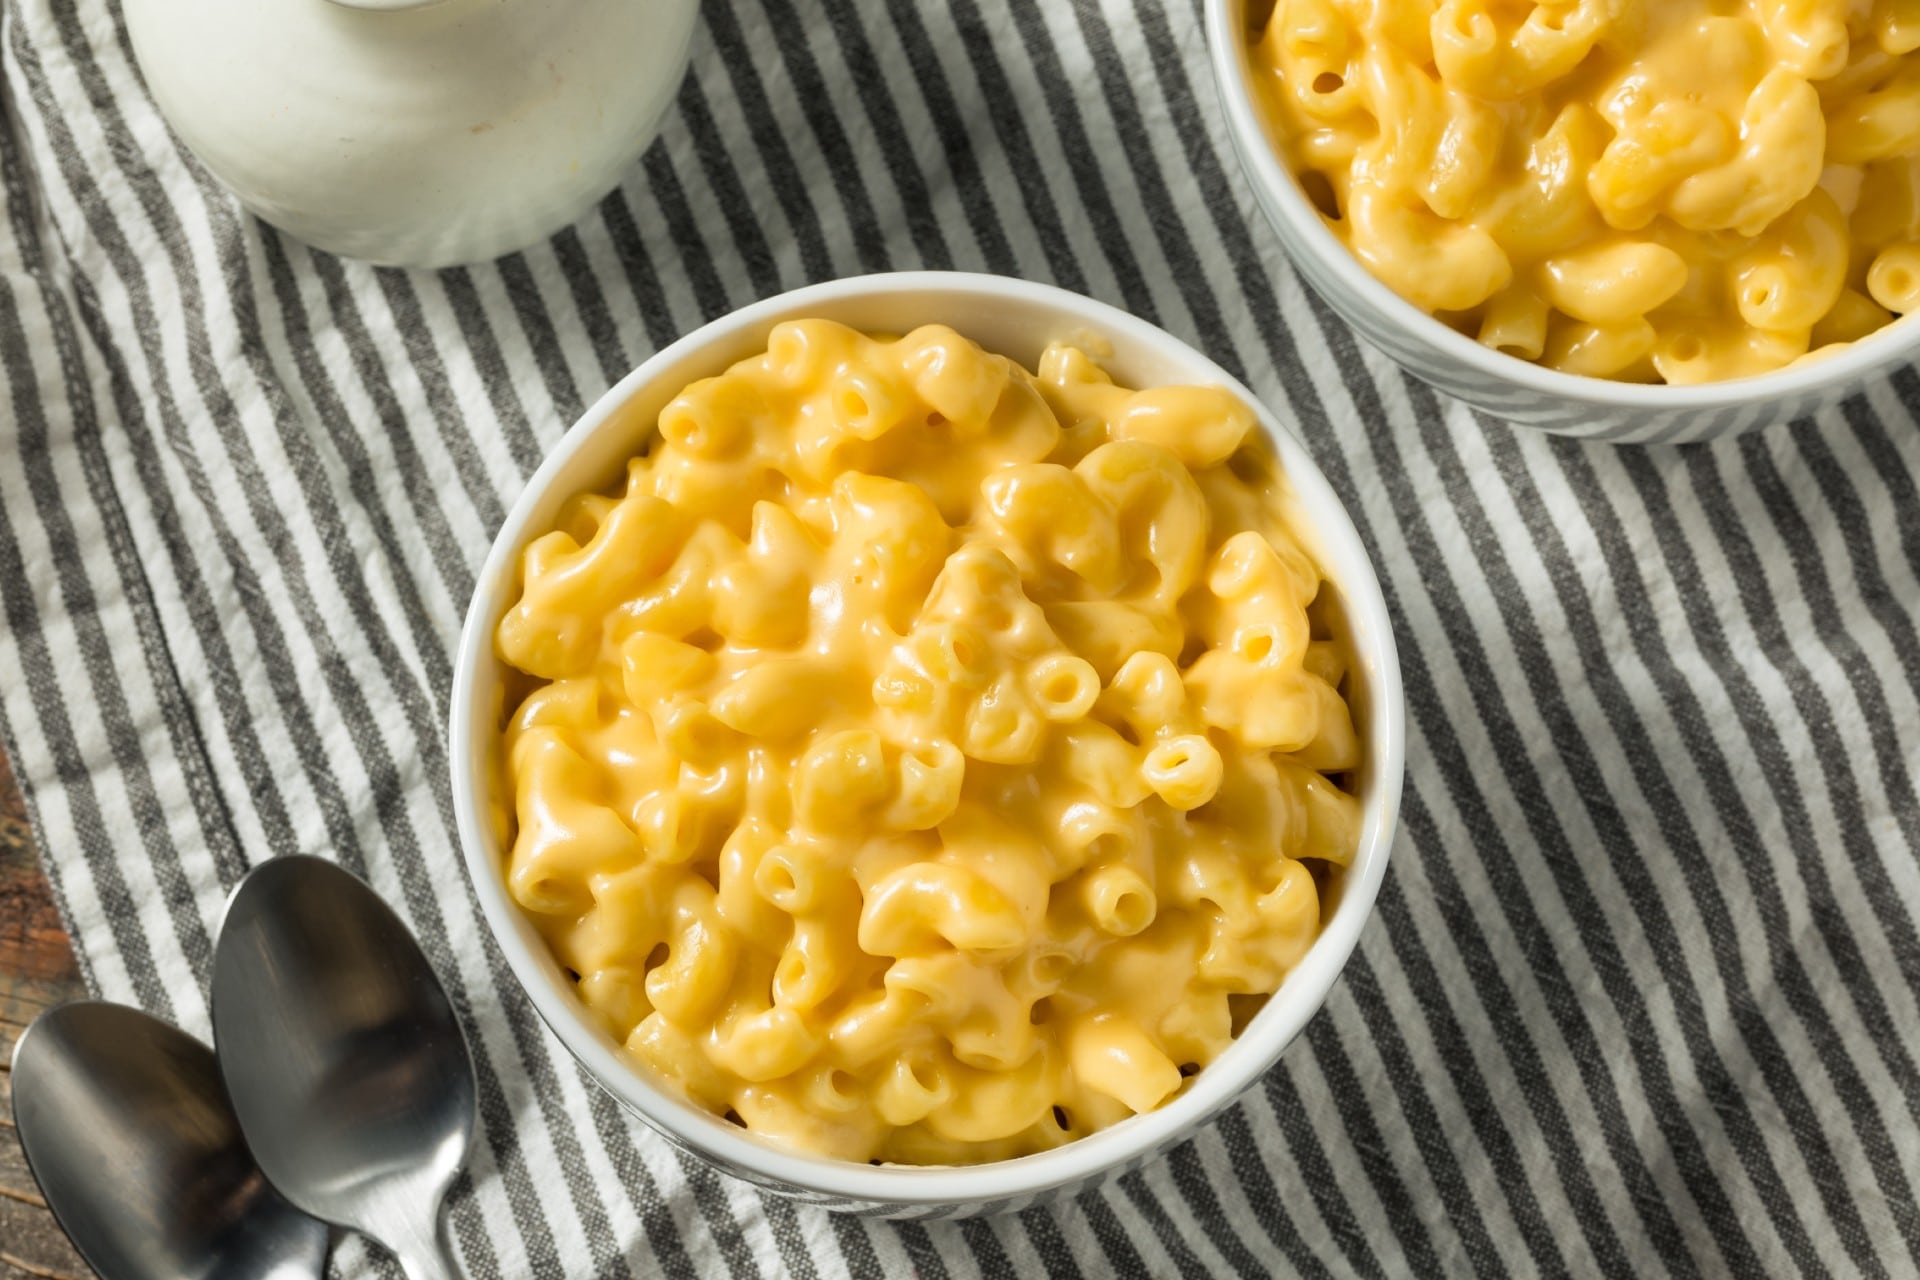 bowls of creamy mac and cheese on a striped table linen